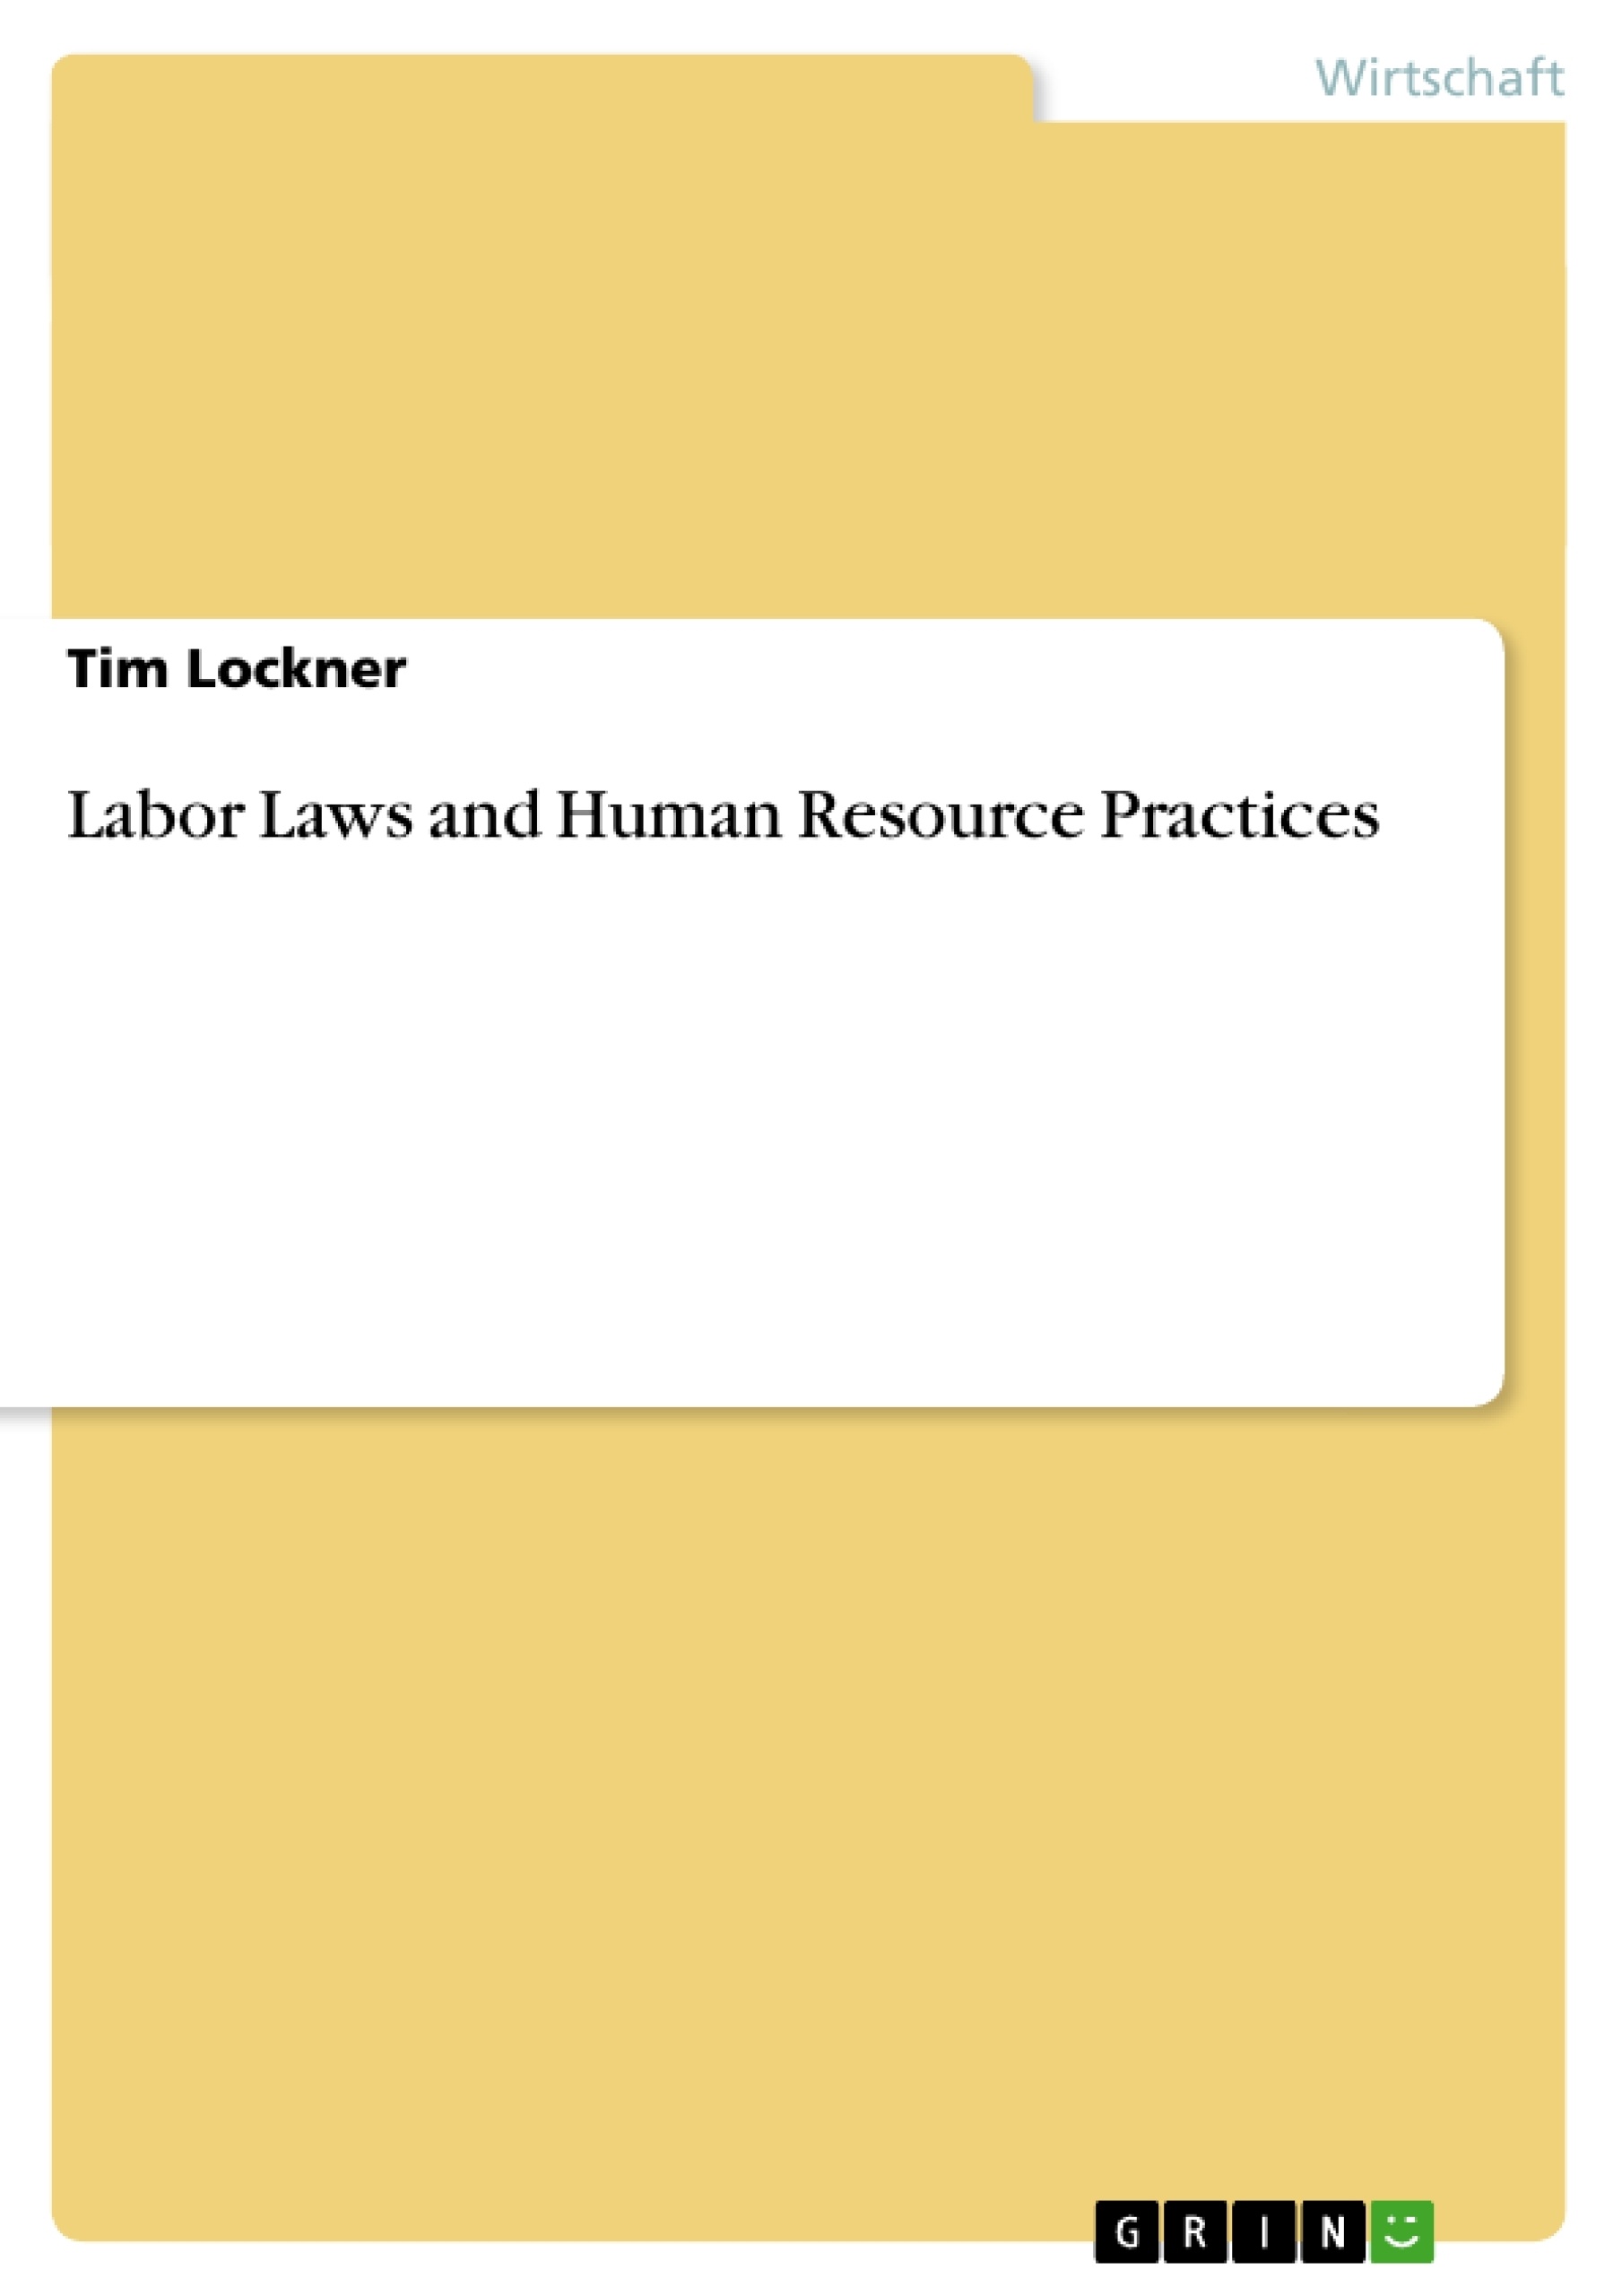 Título: Labor Laws and Human Resource Practices